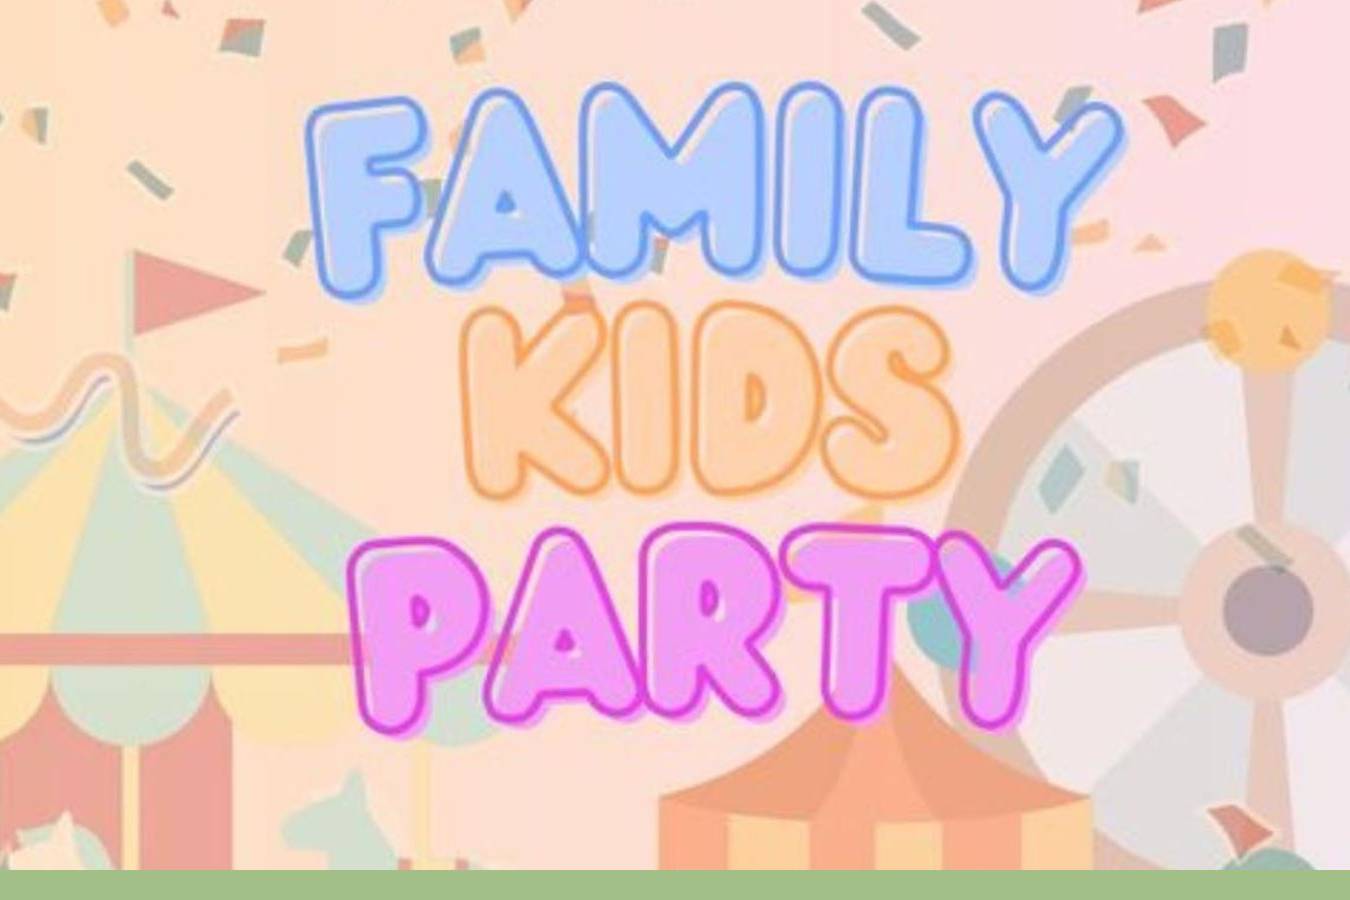 FAMILY KIDS PARTY